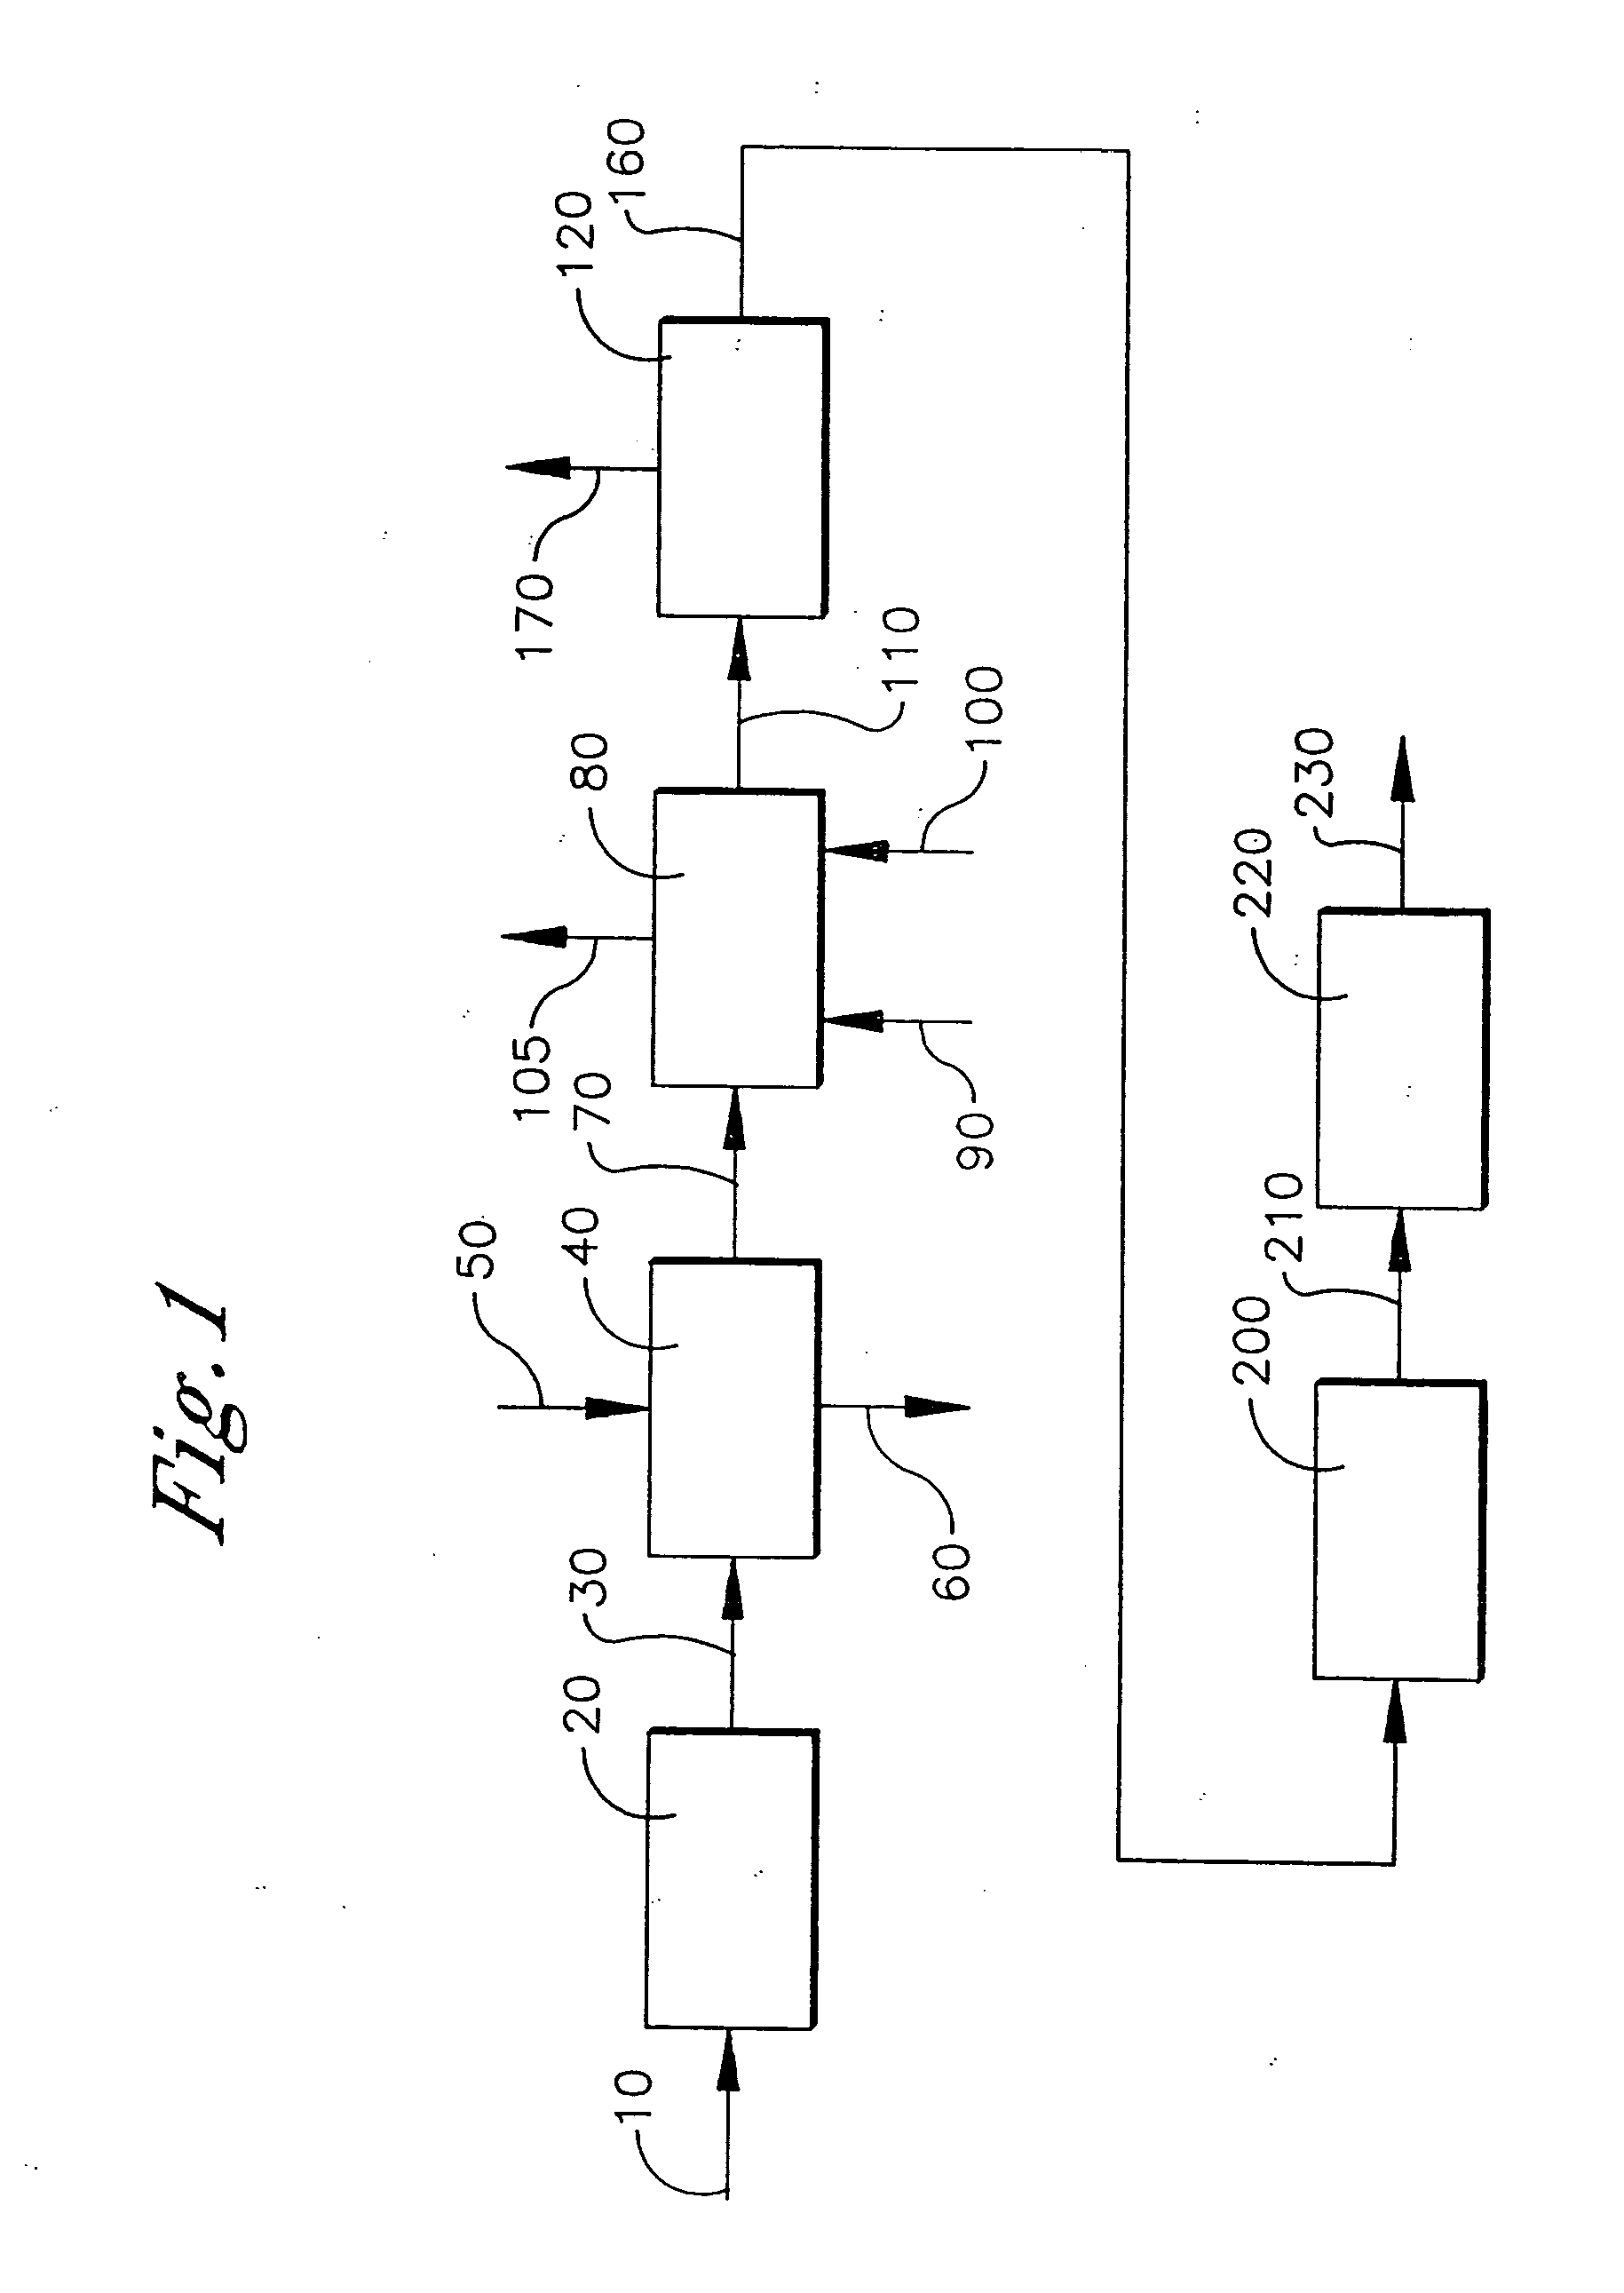 Process for the purification of a crude carboxylic acid slurry